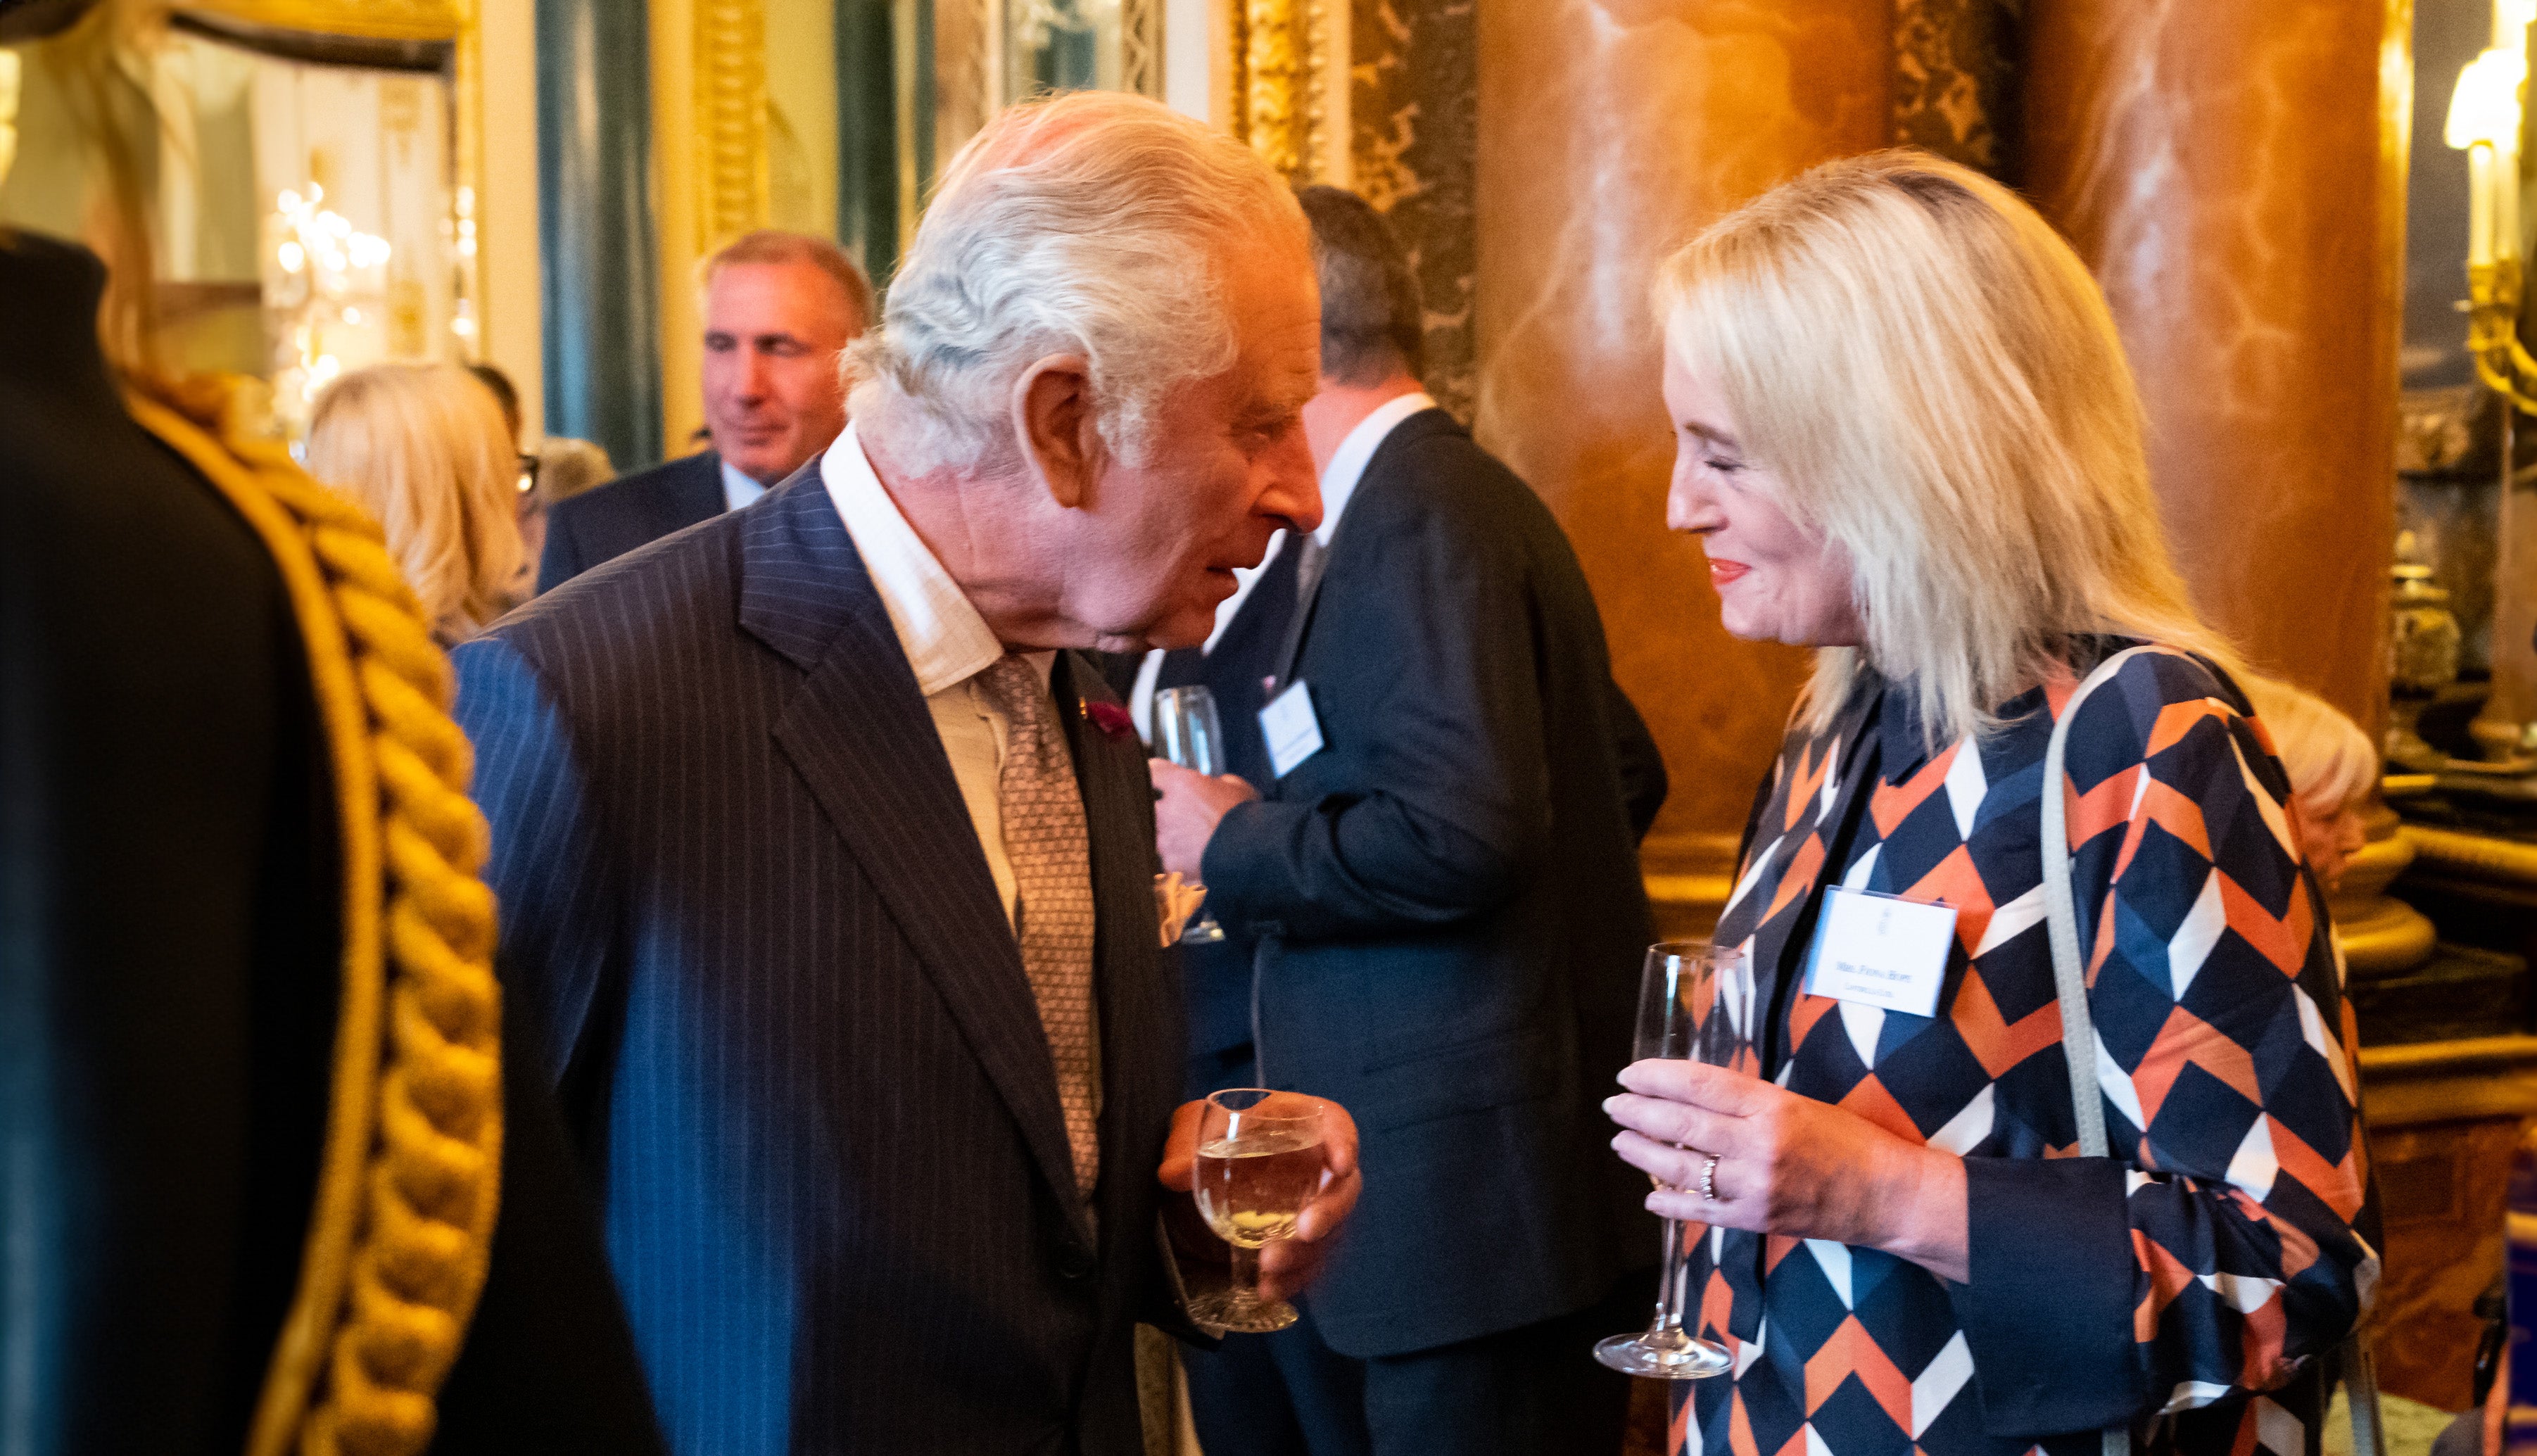 A photo of YuMOVE CEO Fiona Hope meeting King Charles III at the celebration for the King's Award for Enterprise.